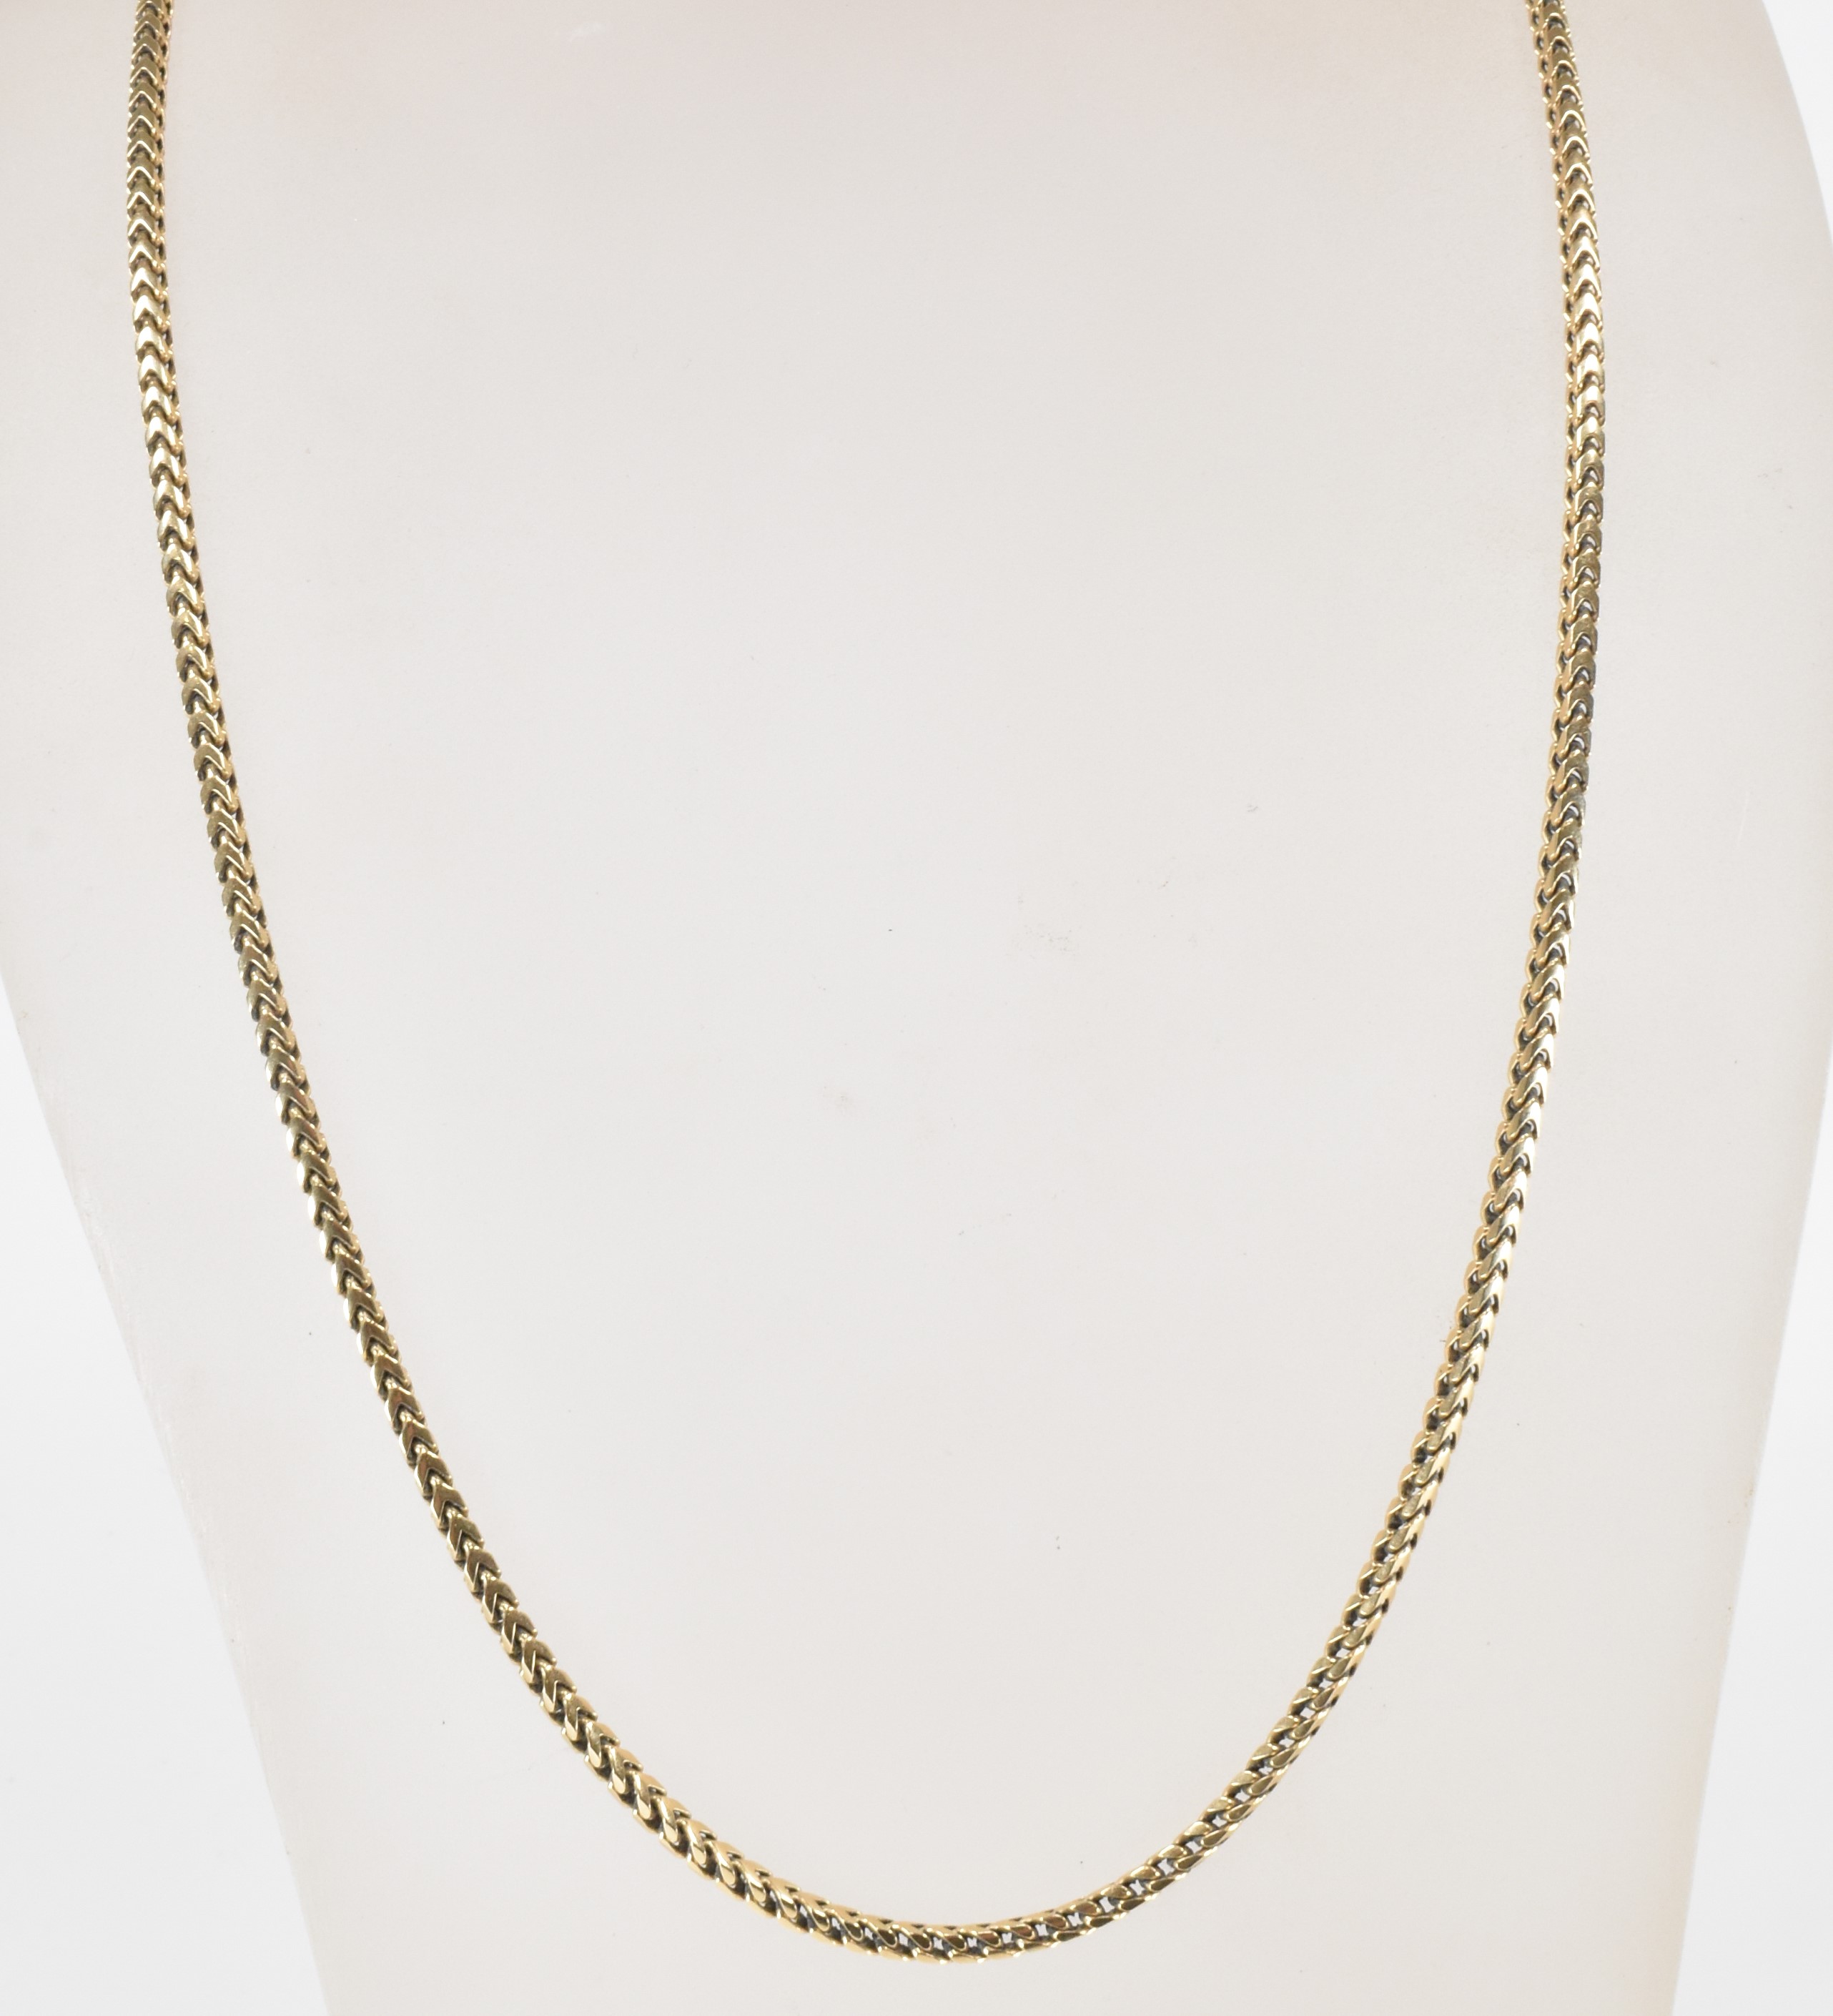 HALLMARKED 9CT GOLD FOUR SIDED CURB CHAIN - Image 4 of 4